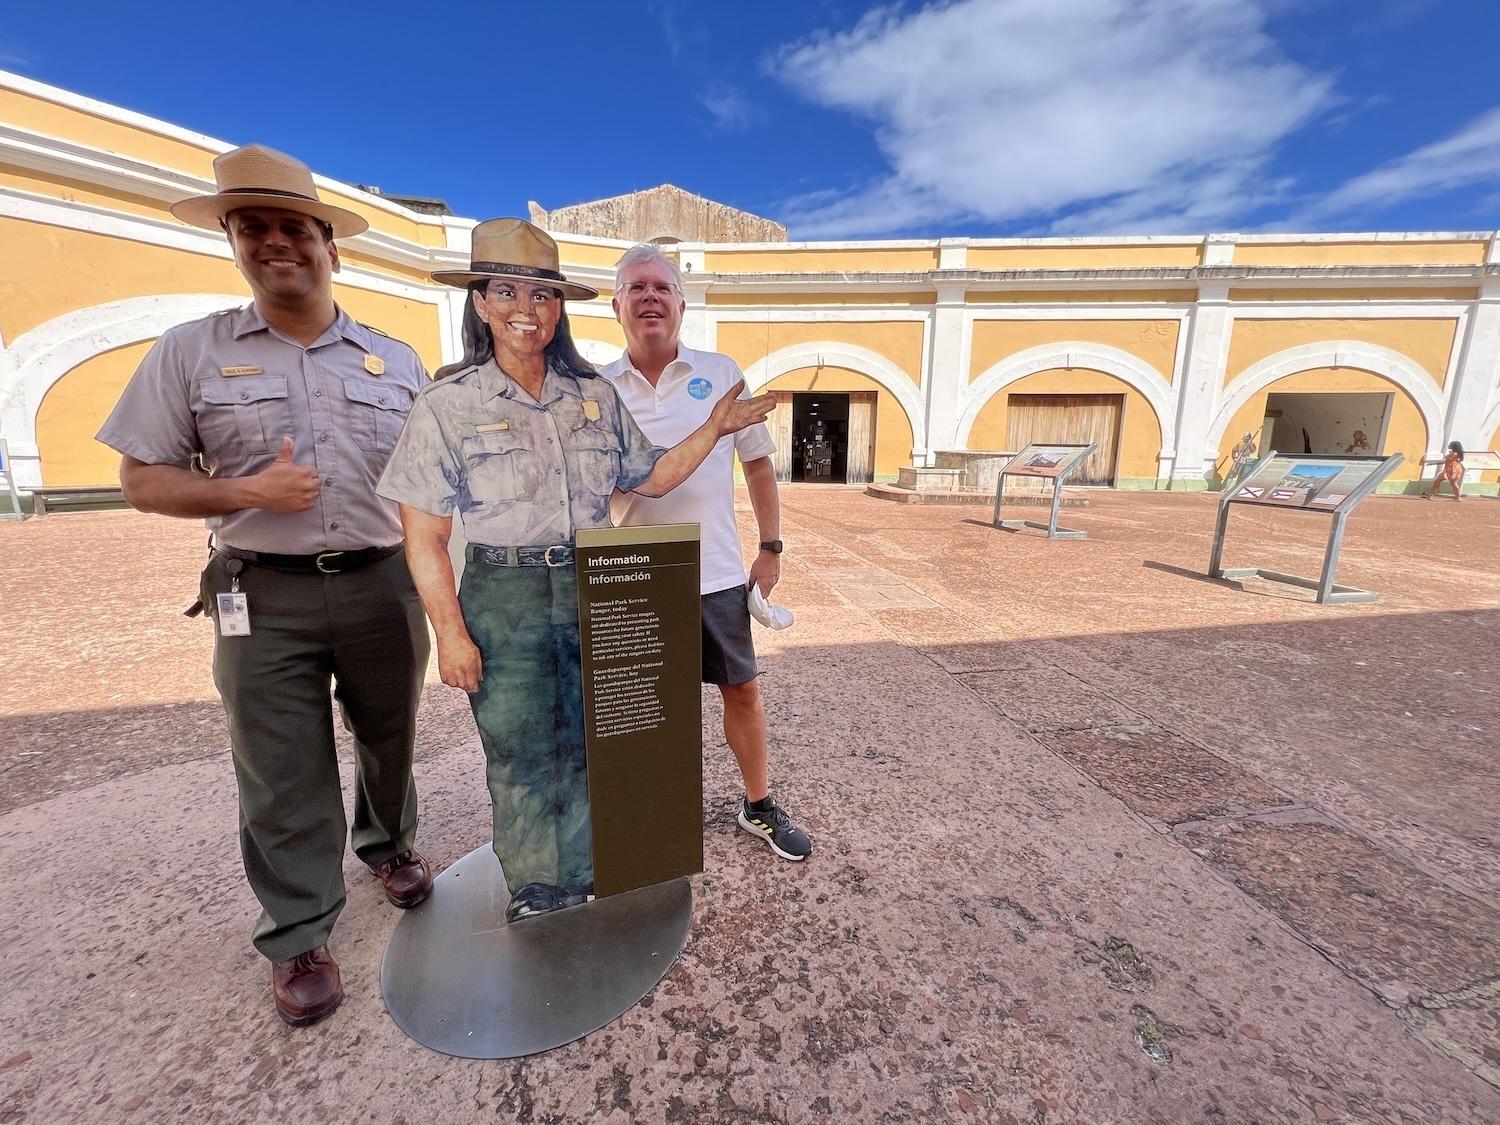 At San Juan National Historic Site's El Morro, ranger Carlos Almodóvar is the head of interpretation. Mike Gillespie, right, founded the Friends of San Juan National Historic Site.